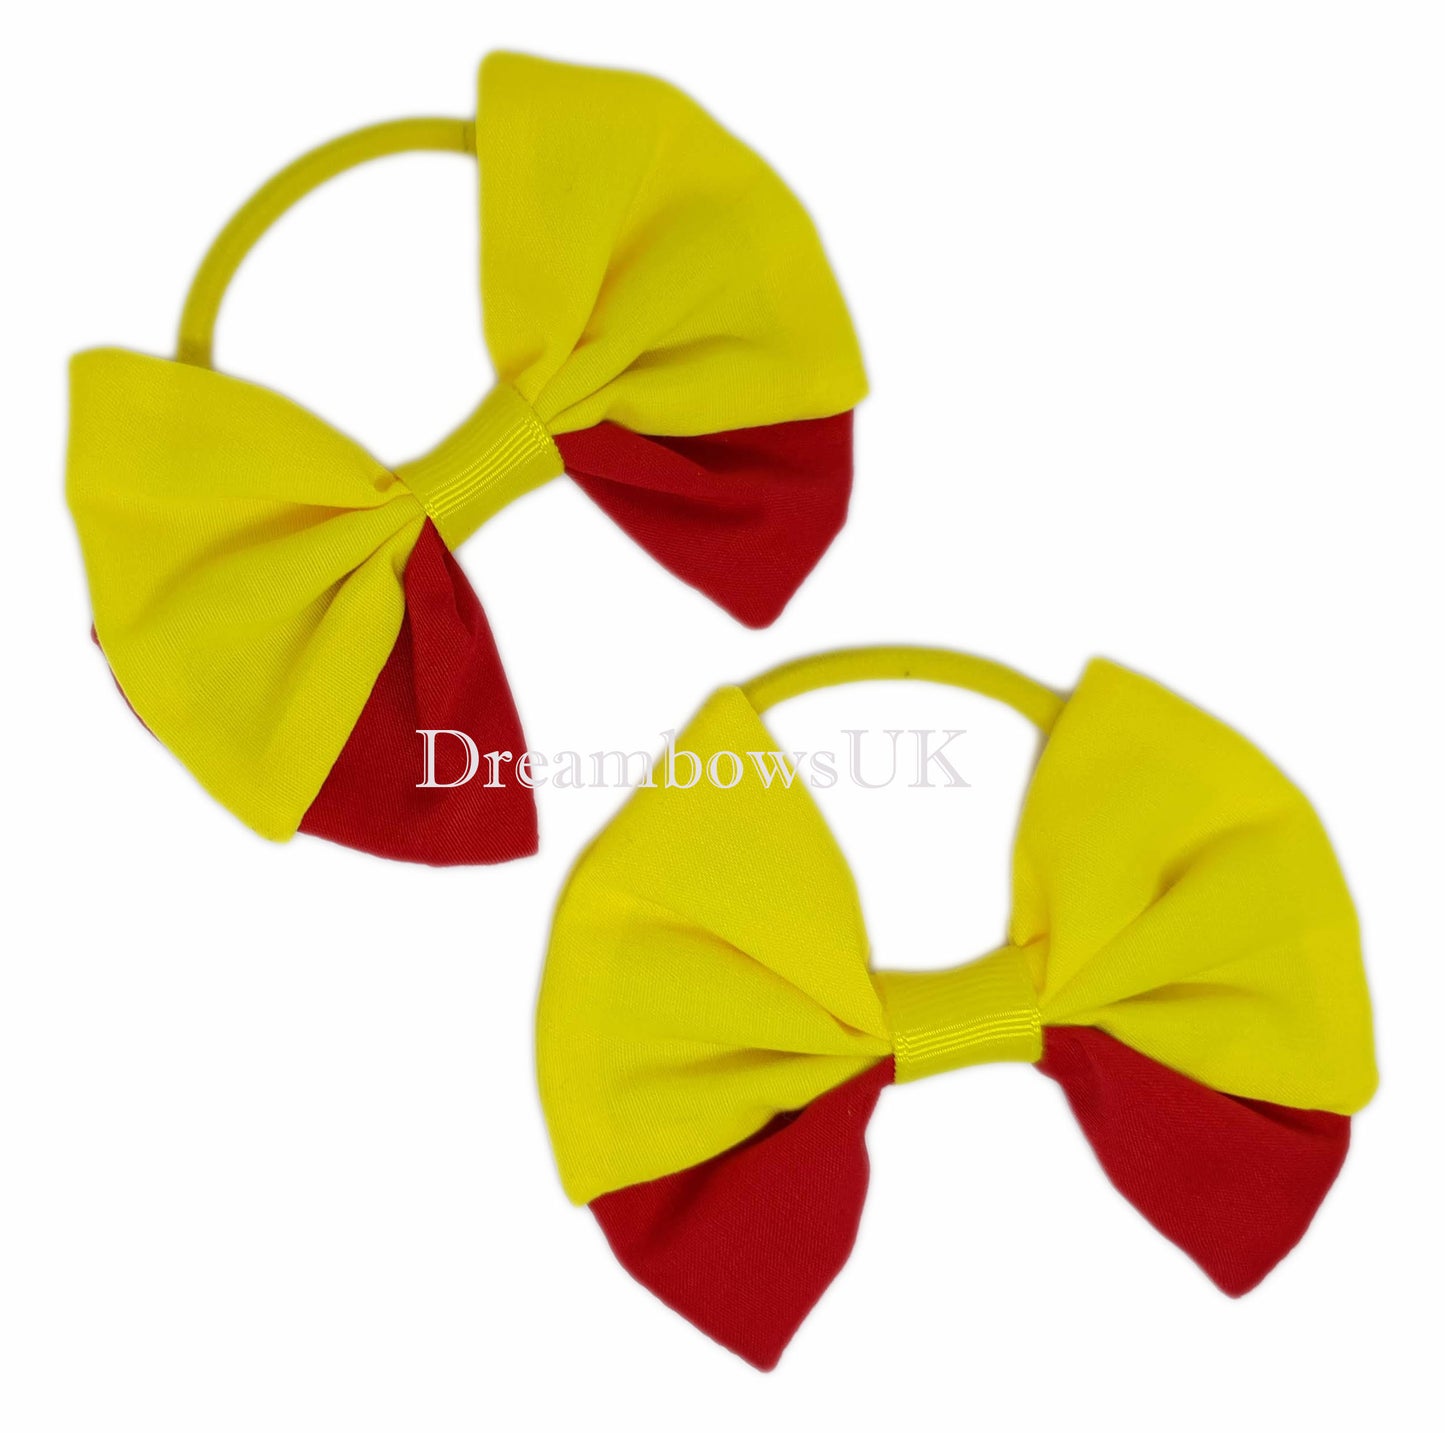 2x Red and yellow fabric hair bows